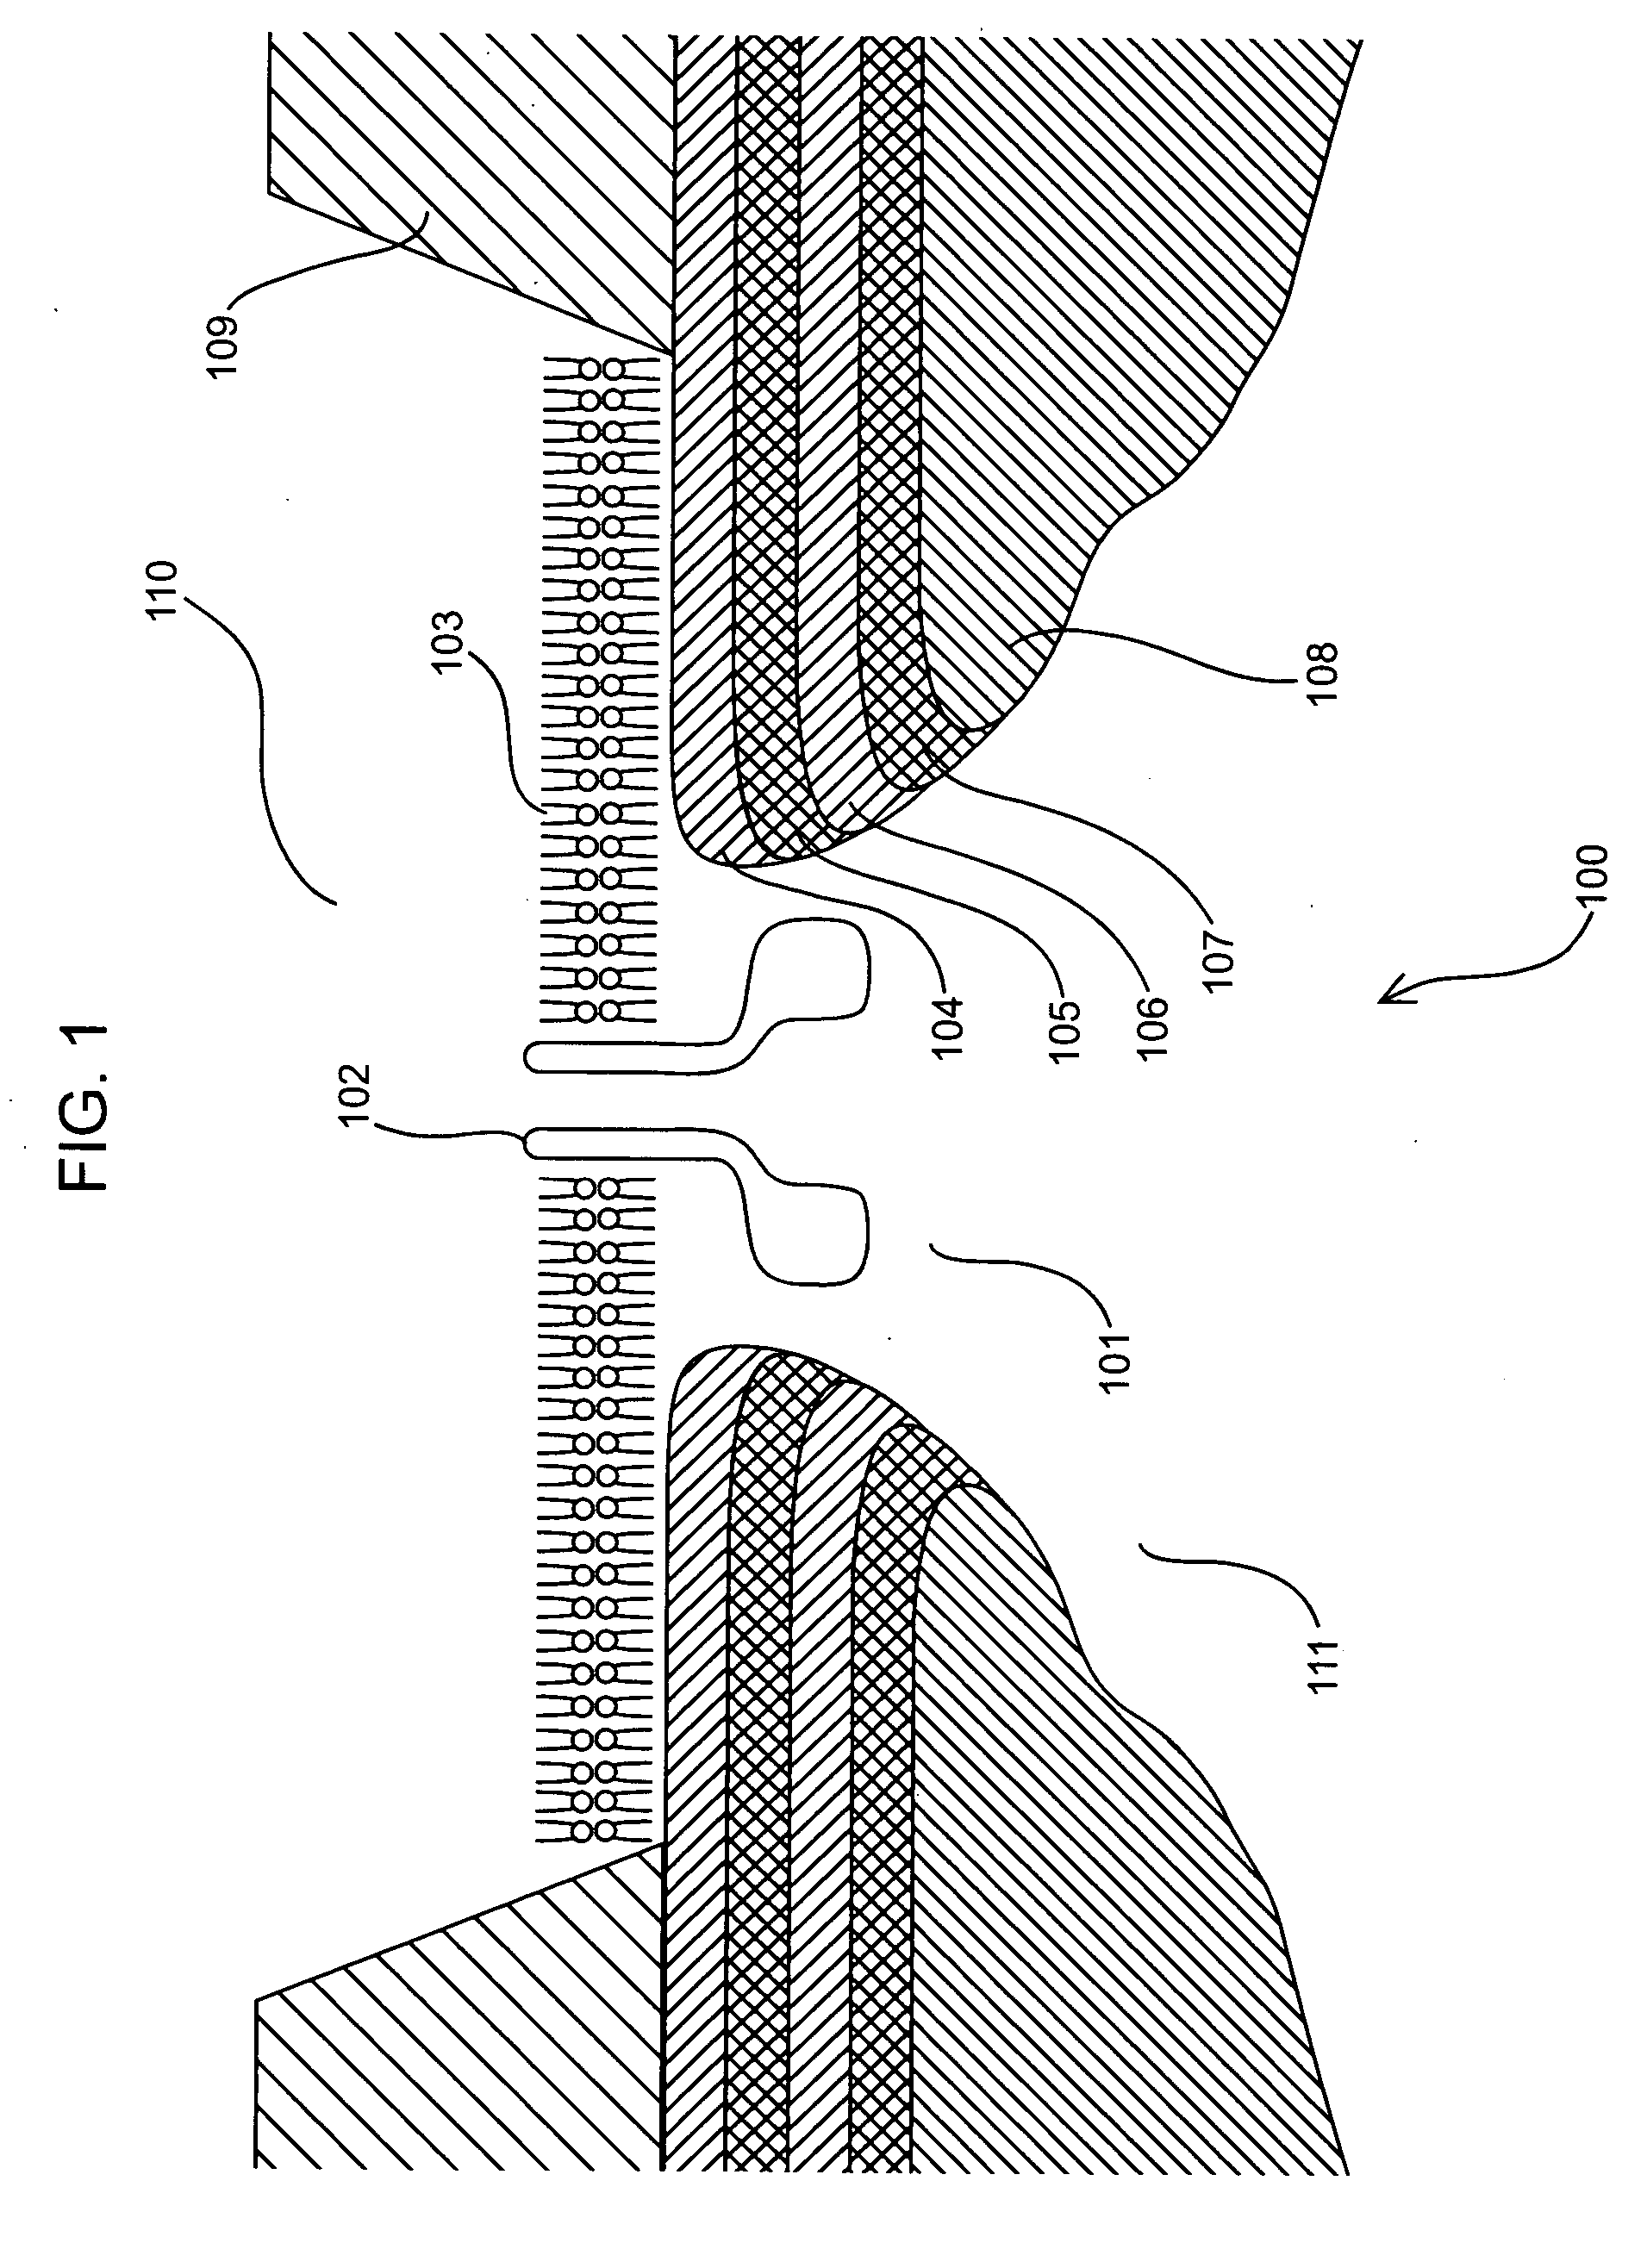 Molecular resonant tunneling sensor and methods of fabricating and using the same